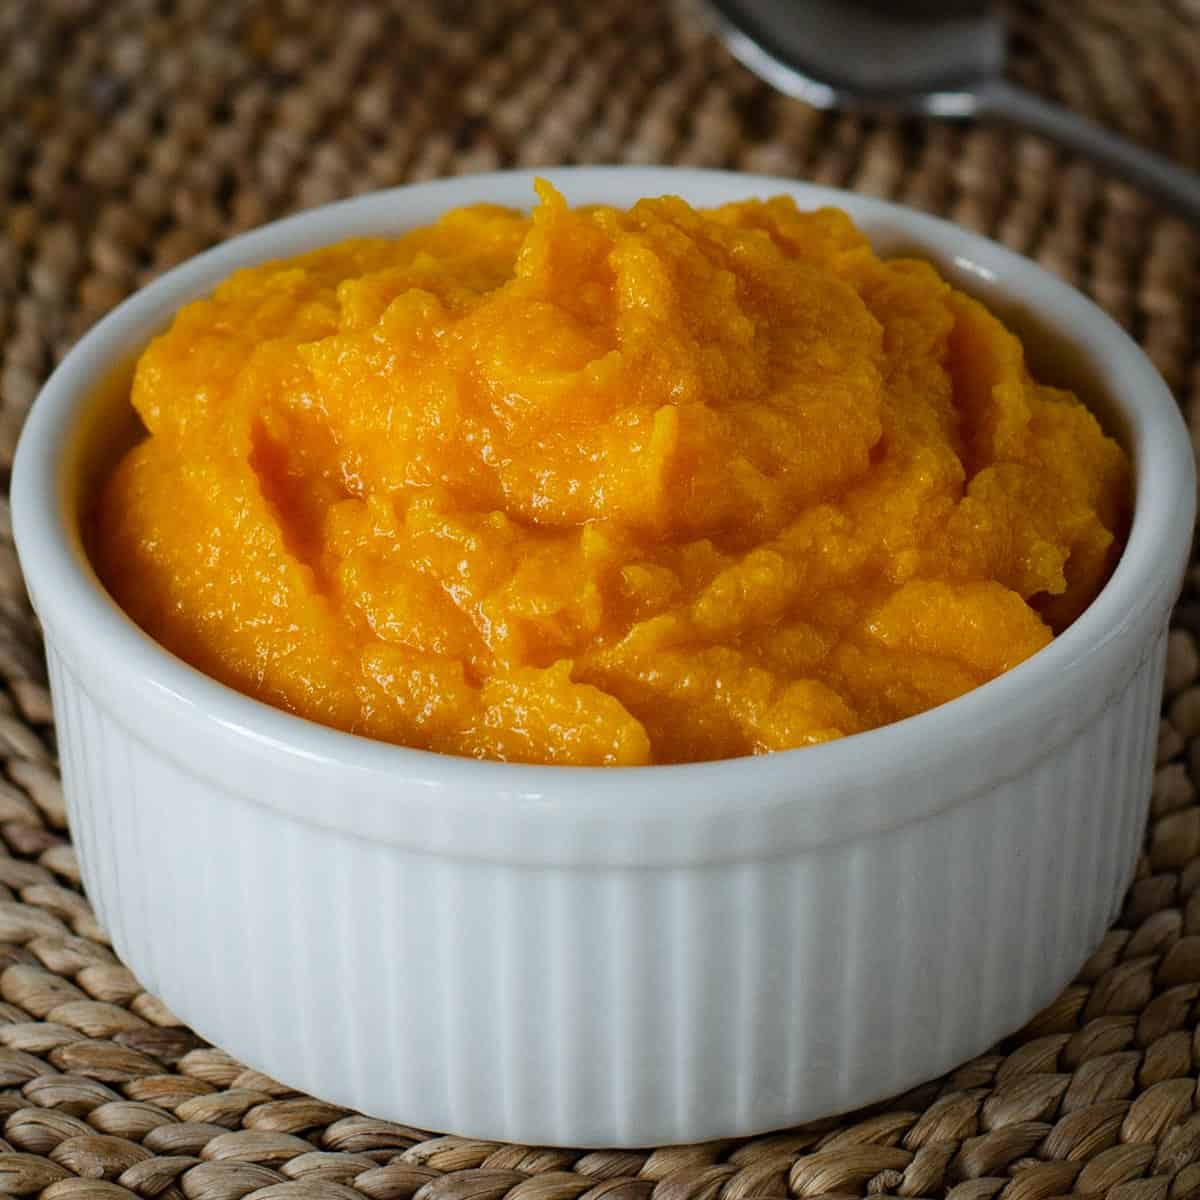 Smoked Maple Butternut Squash - Cook Eat Well